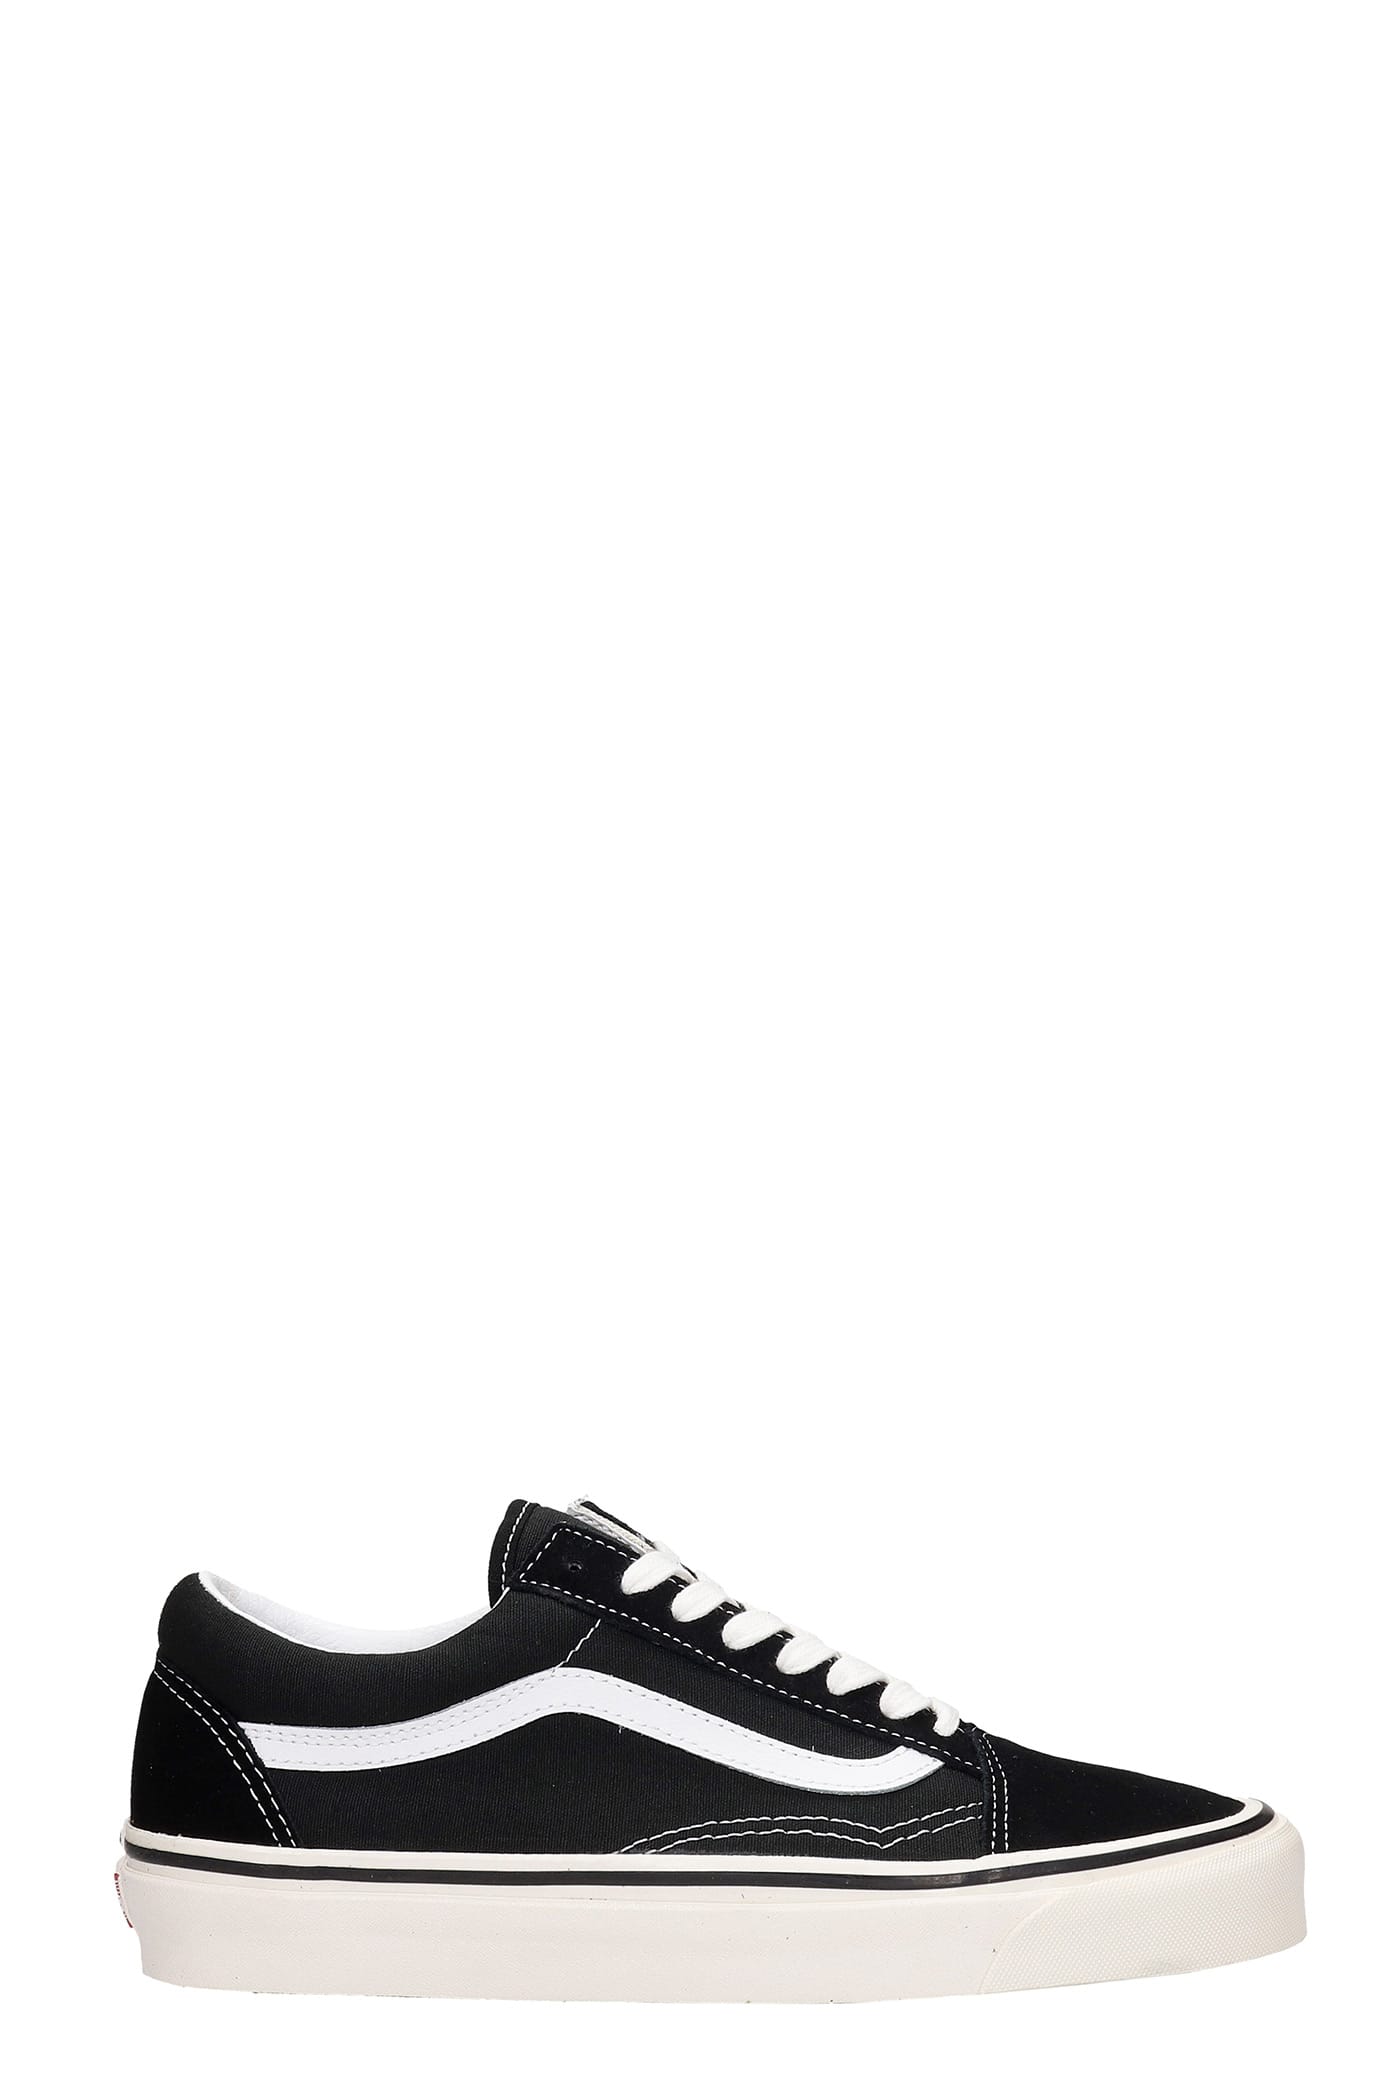 VANS OLD SKOOL 36 trainers IN BLACK CANVAS,VN0A38G2PXC1